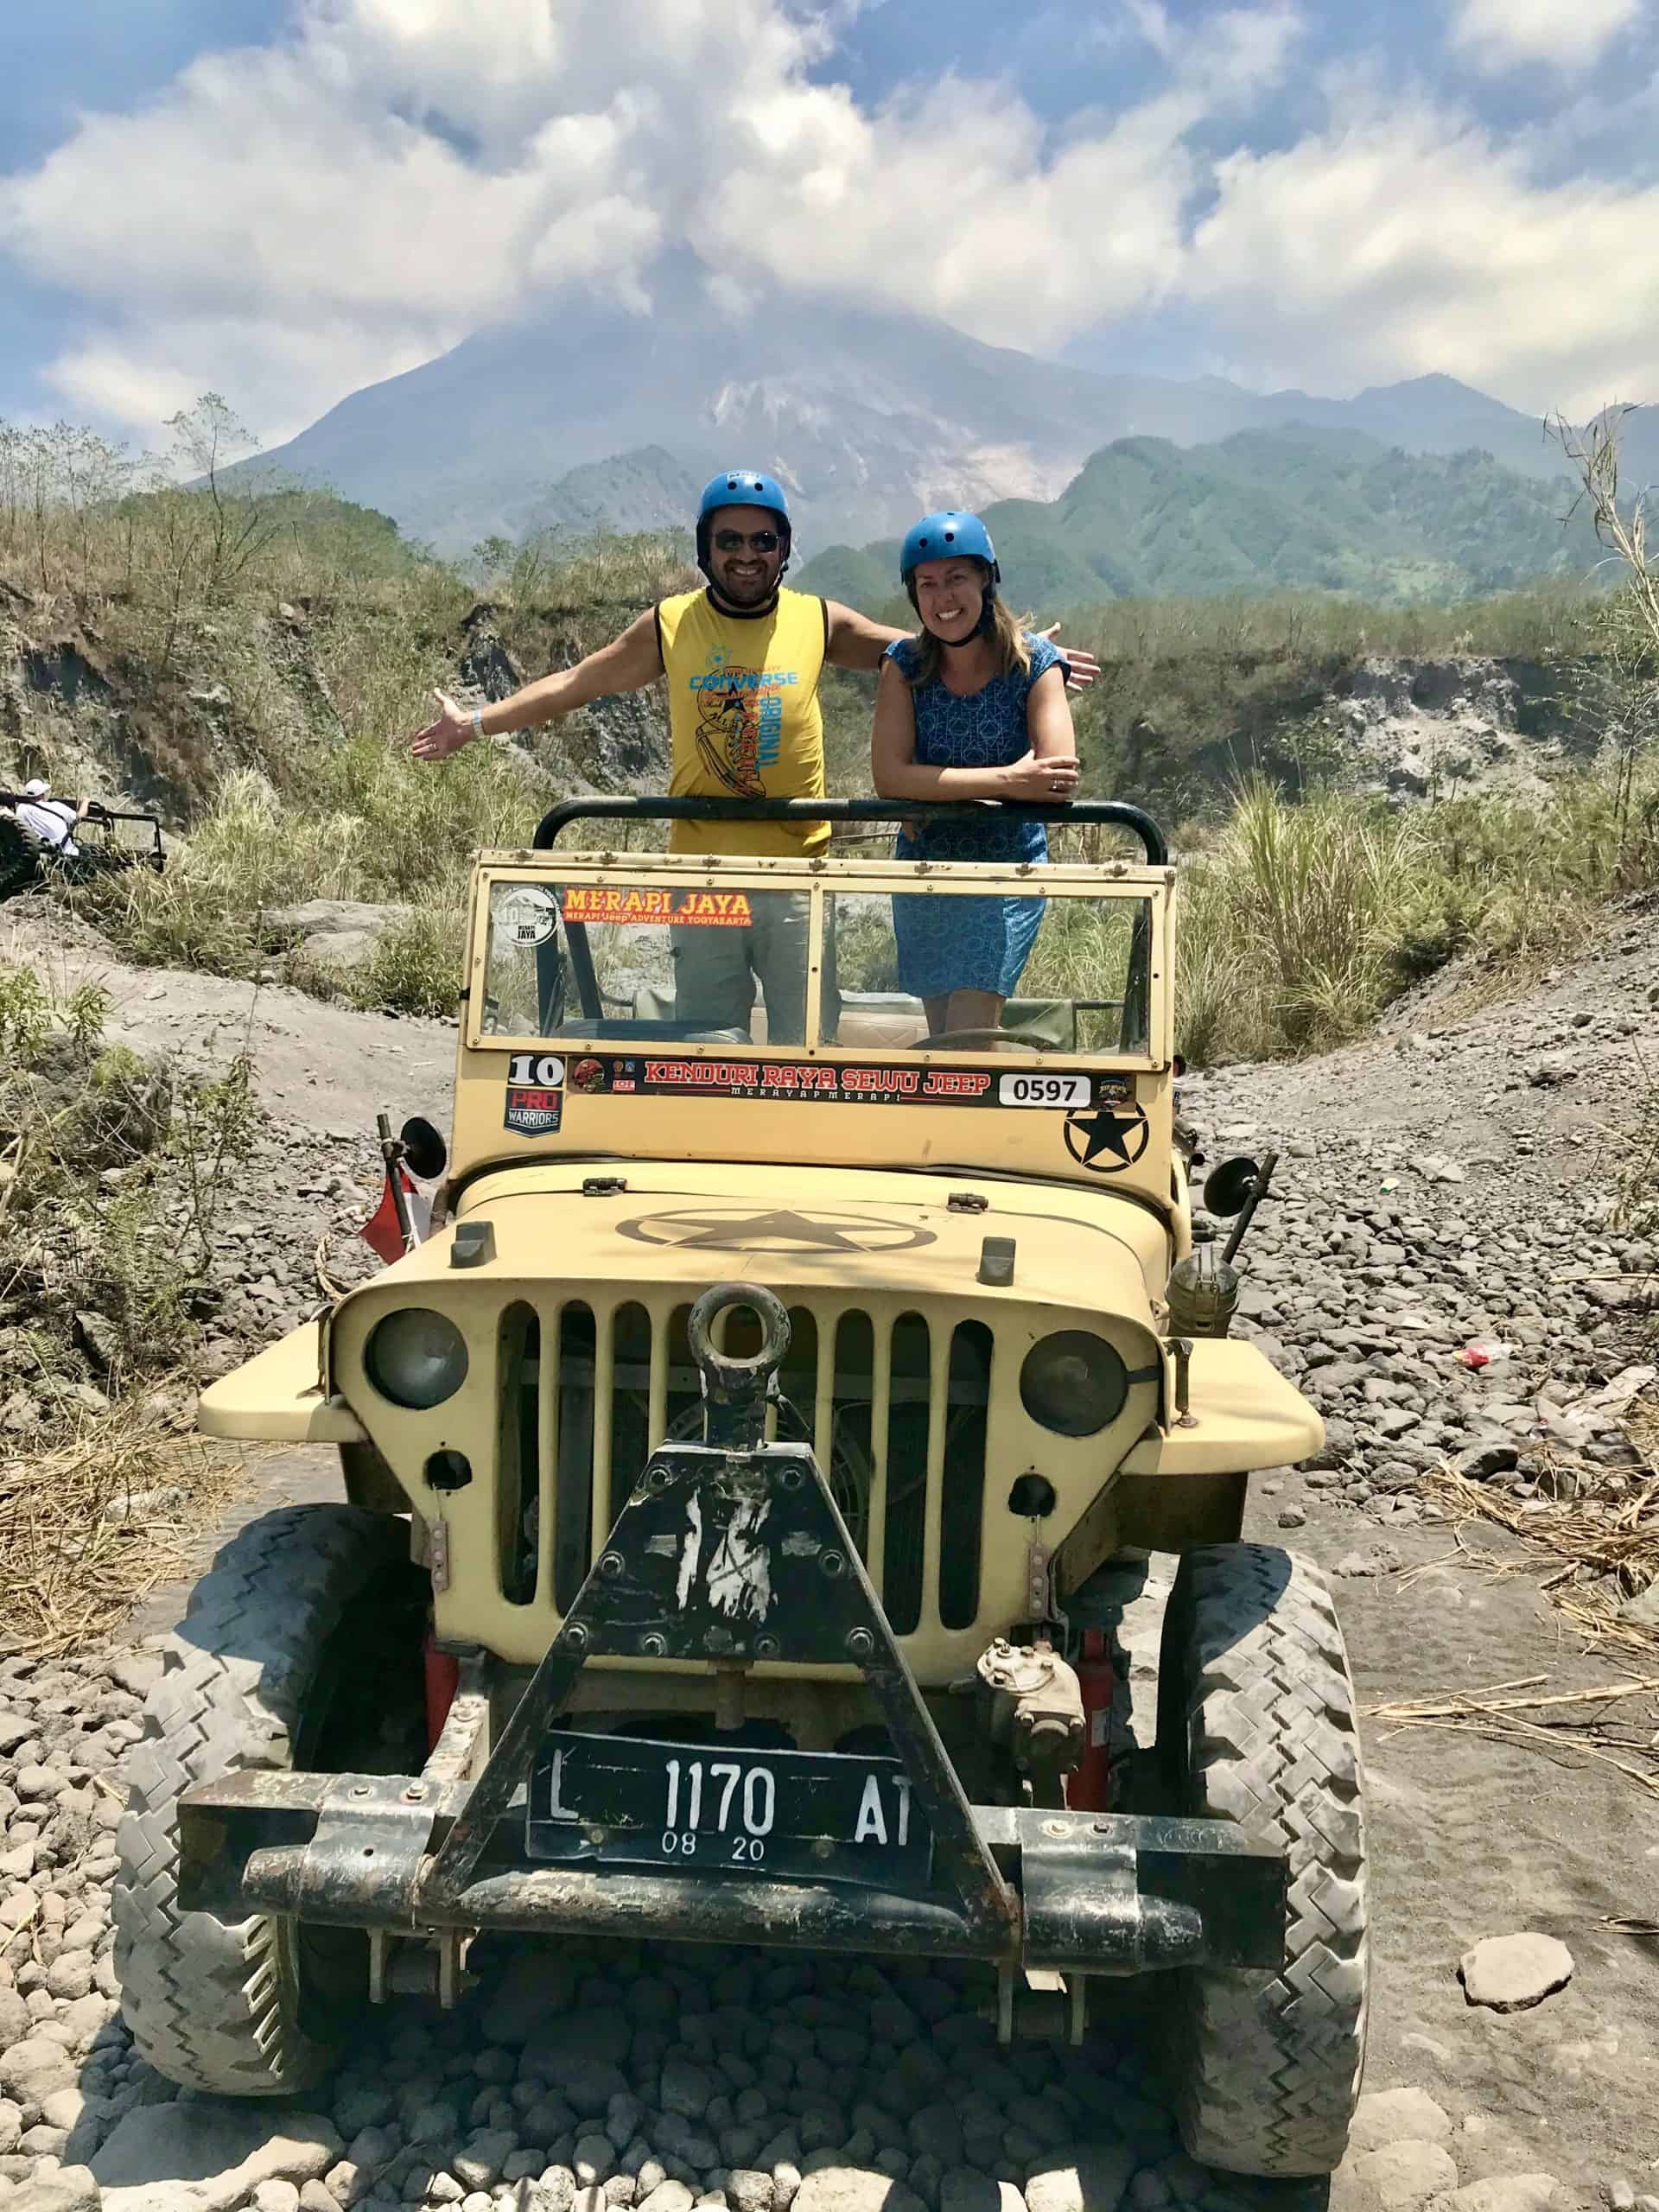 Omer and Joannda standing in the back of an open jeep in front of Mount Merapi